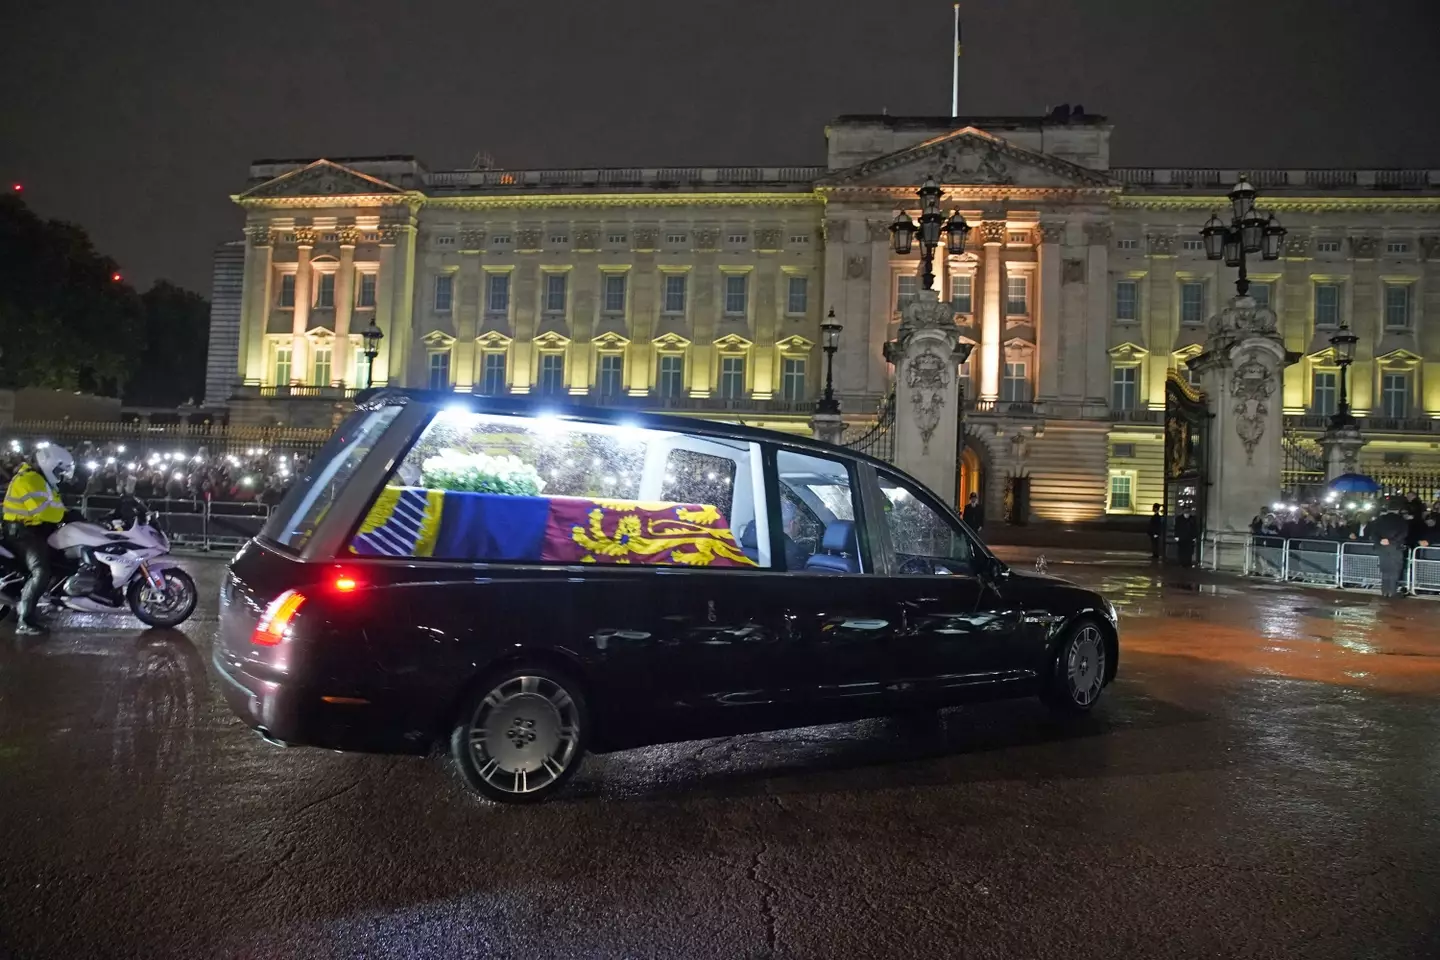 The Queen's coffin has arrived at Buckingham Palace.